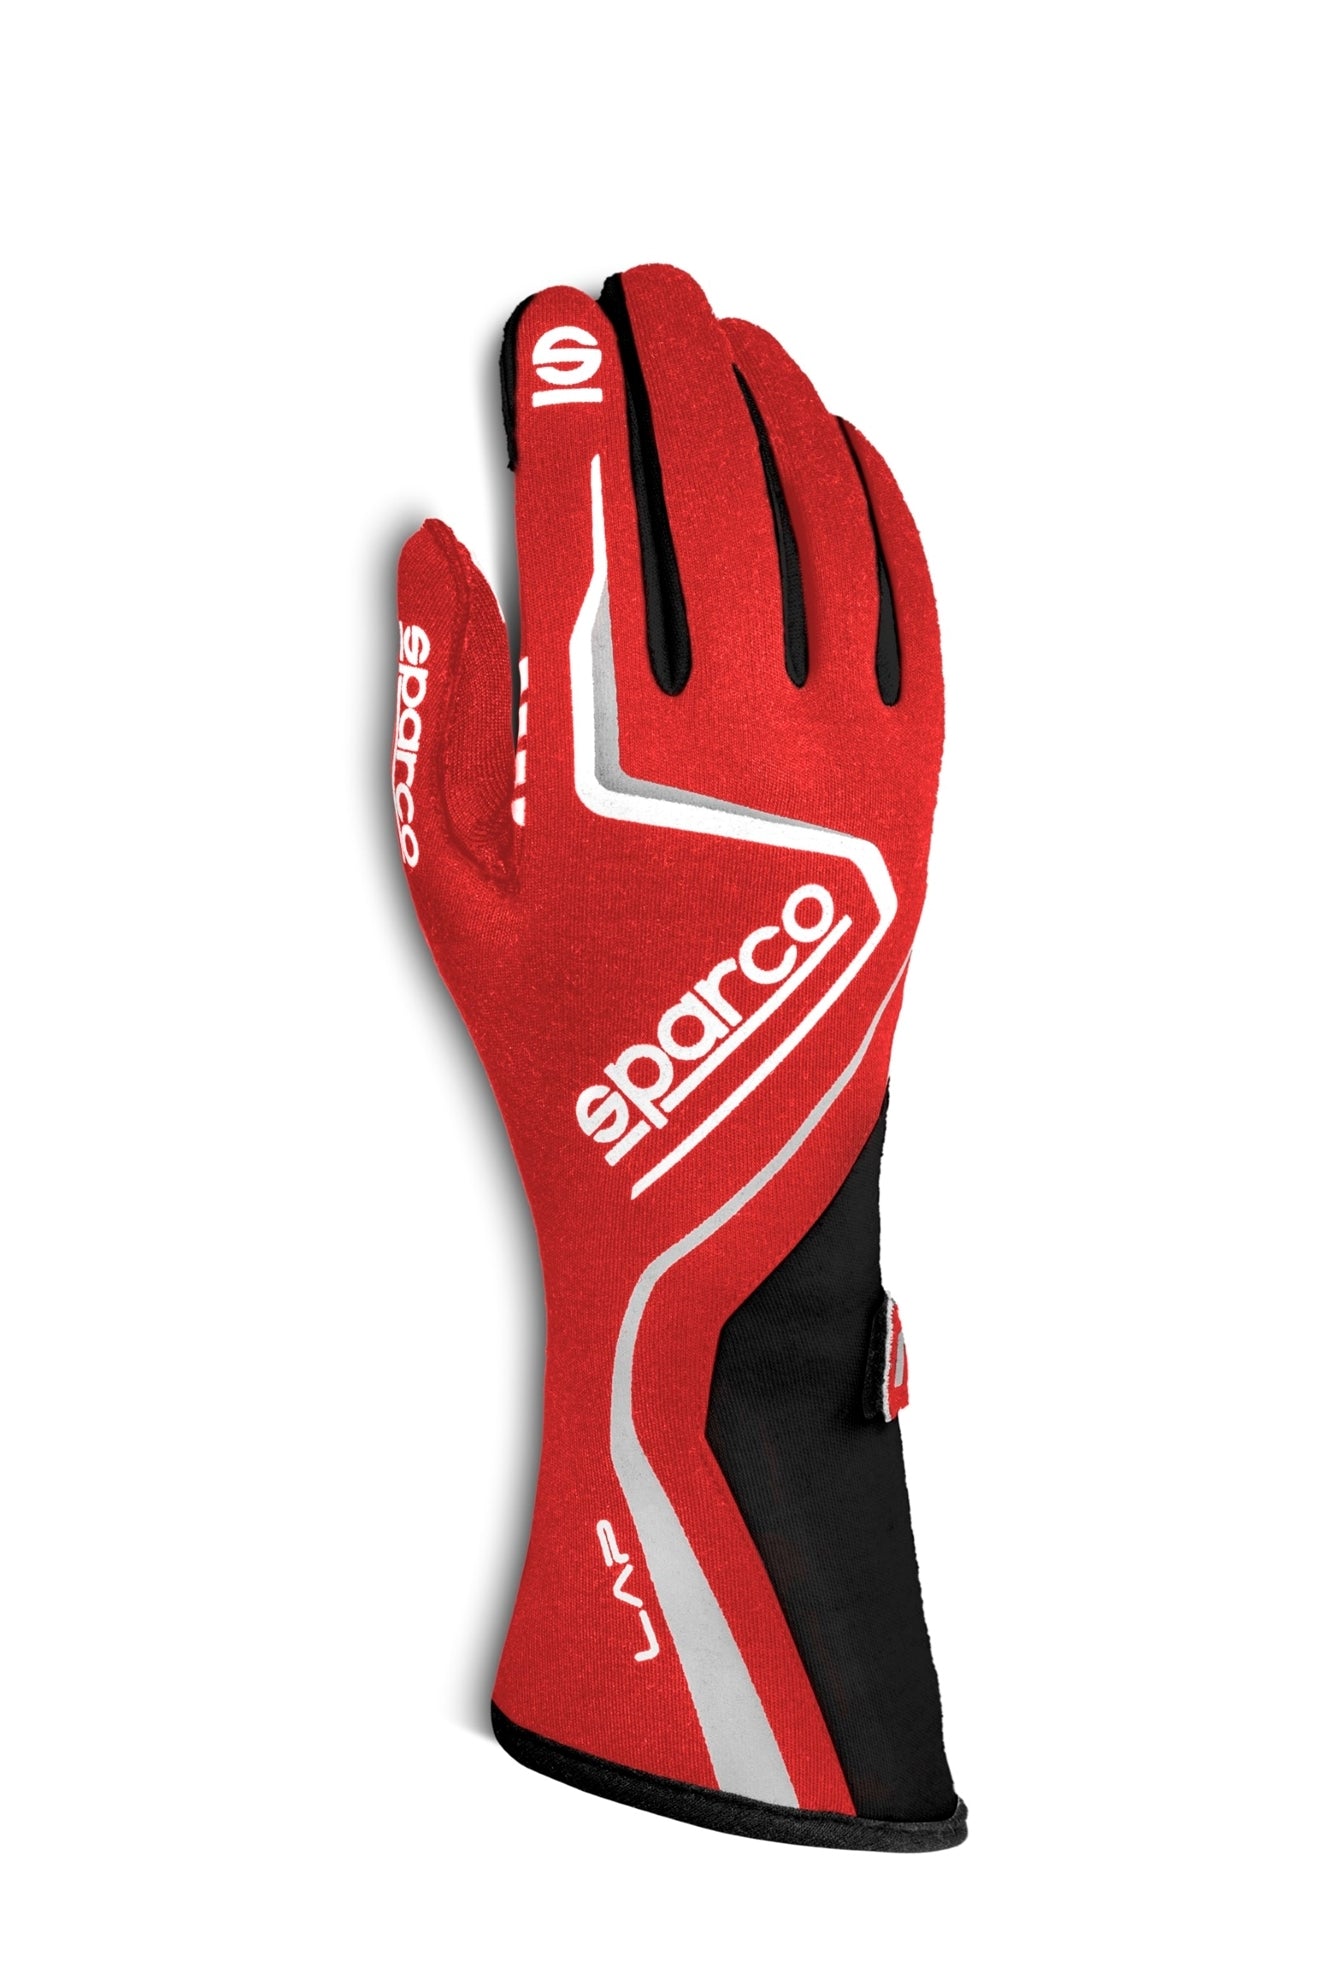 Sparco Lap (2020) Racing Gloves